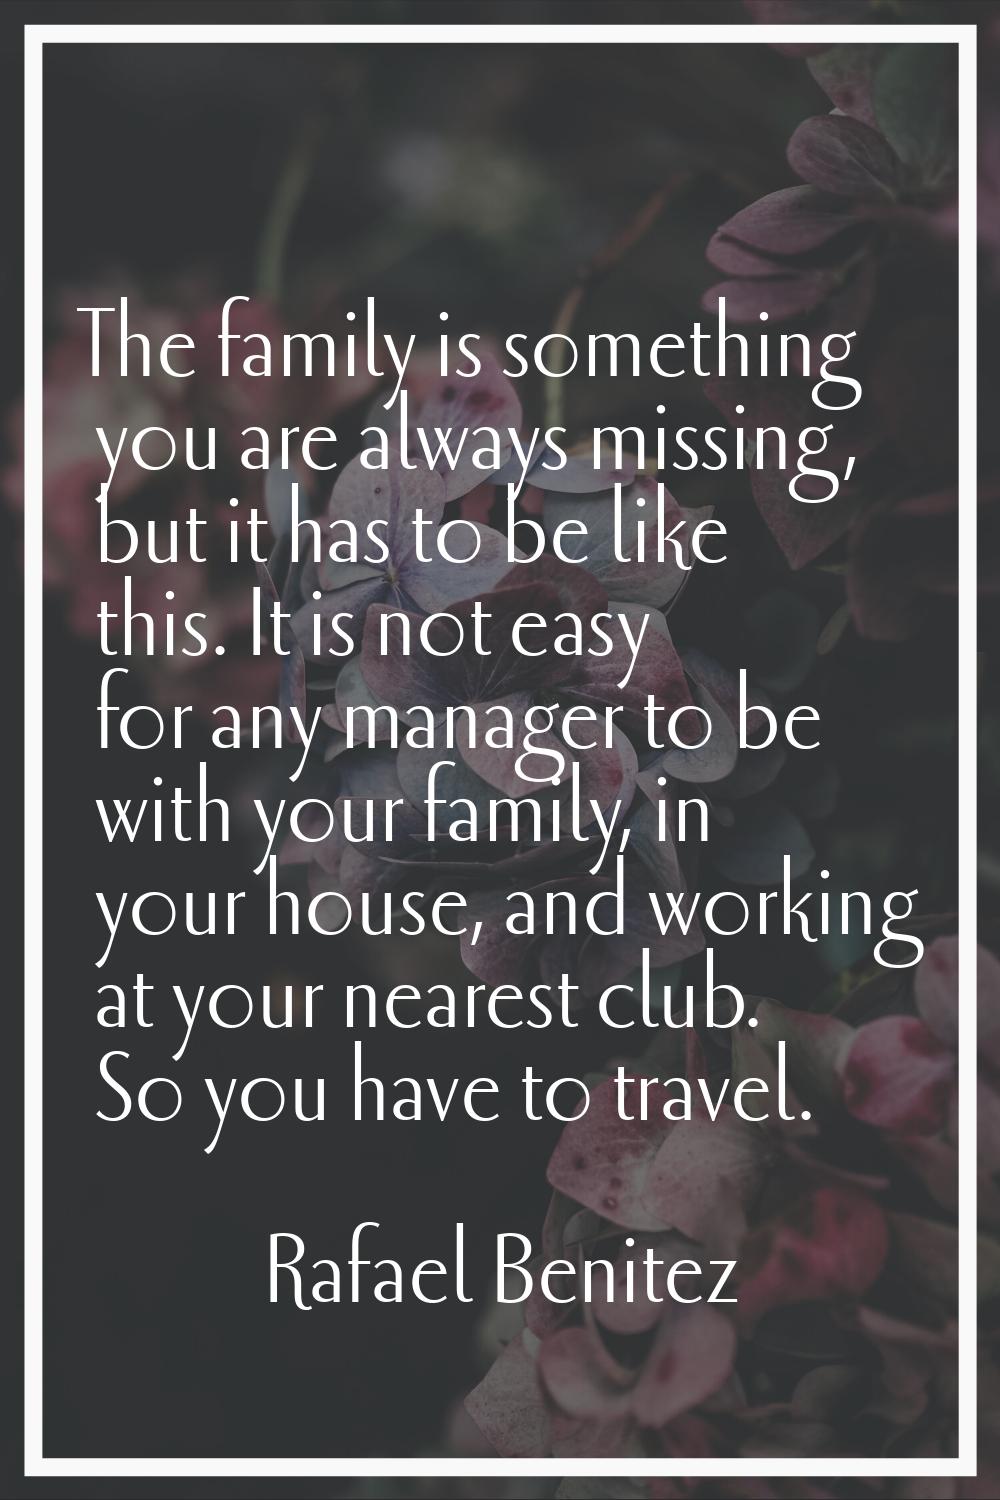 The family is something you are always missing, but it has to be like this. It is not easy for any 